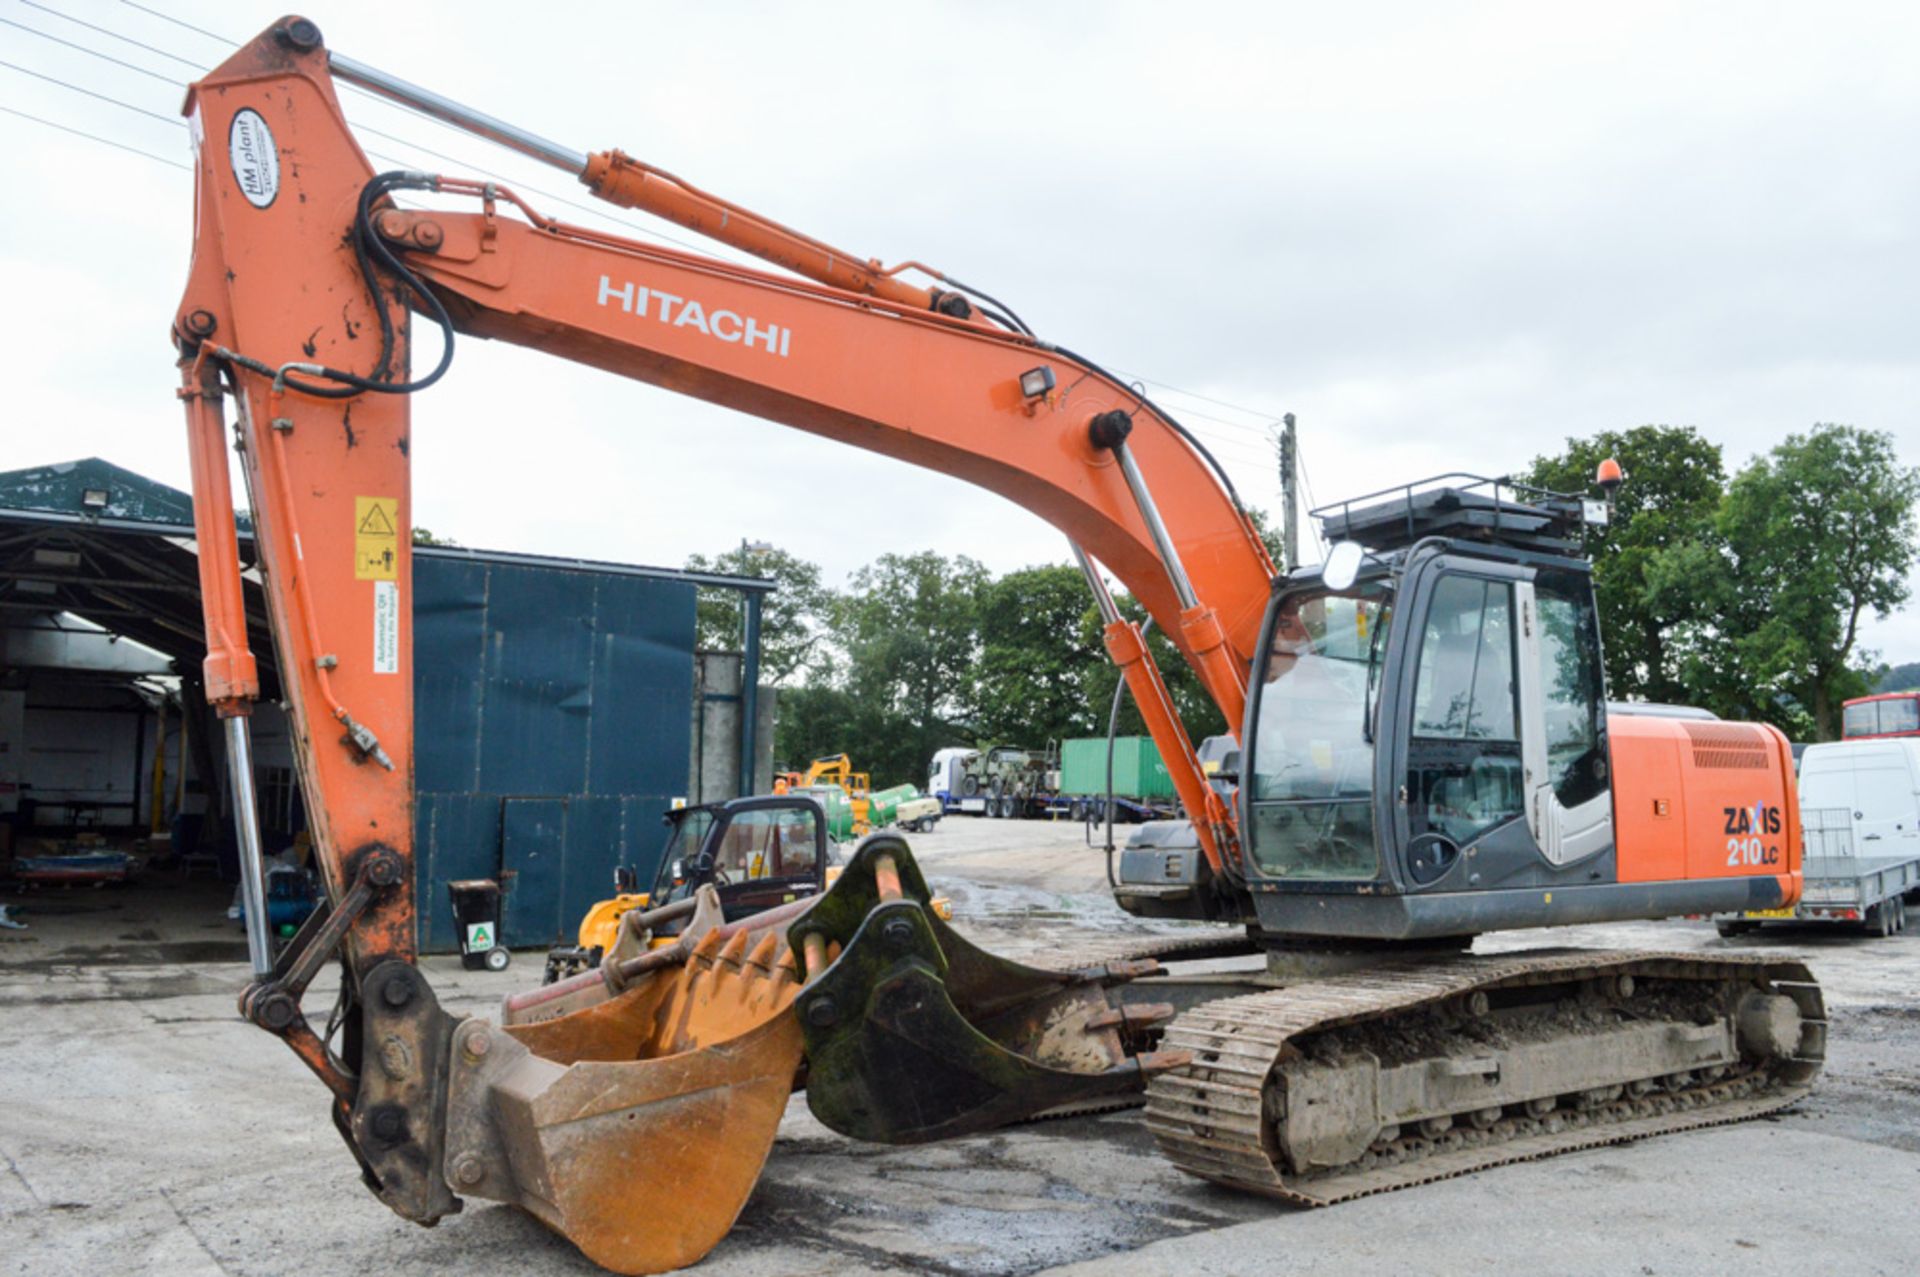 Hitachi Zaxis 210LC 21 tonne steel tracked excavator Year: 2008 S/N: 601306 Recorded Hours: 6876